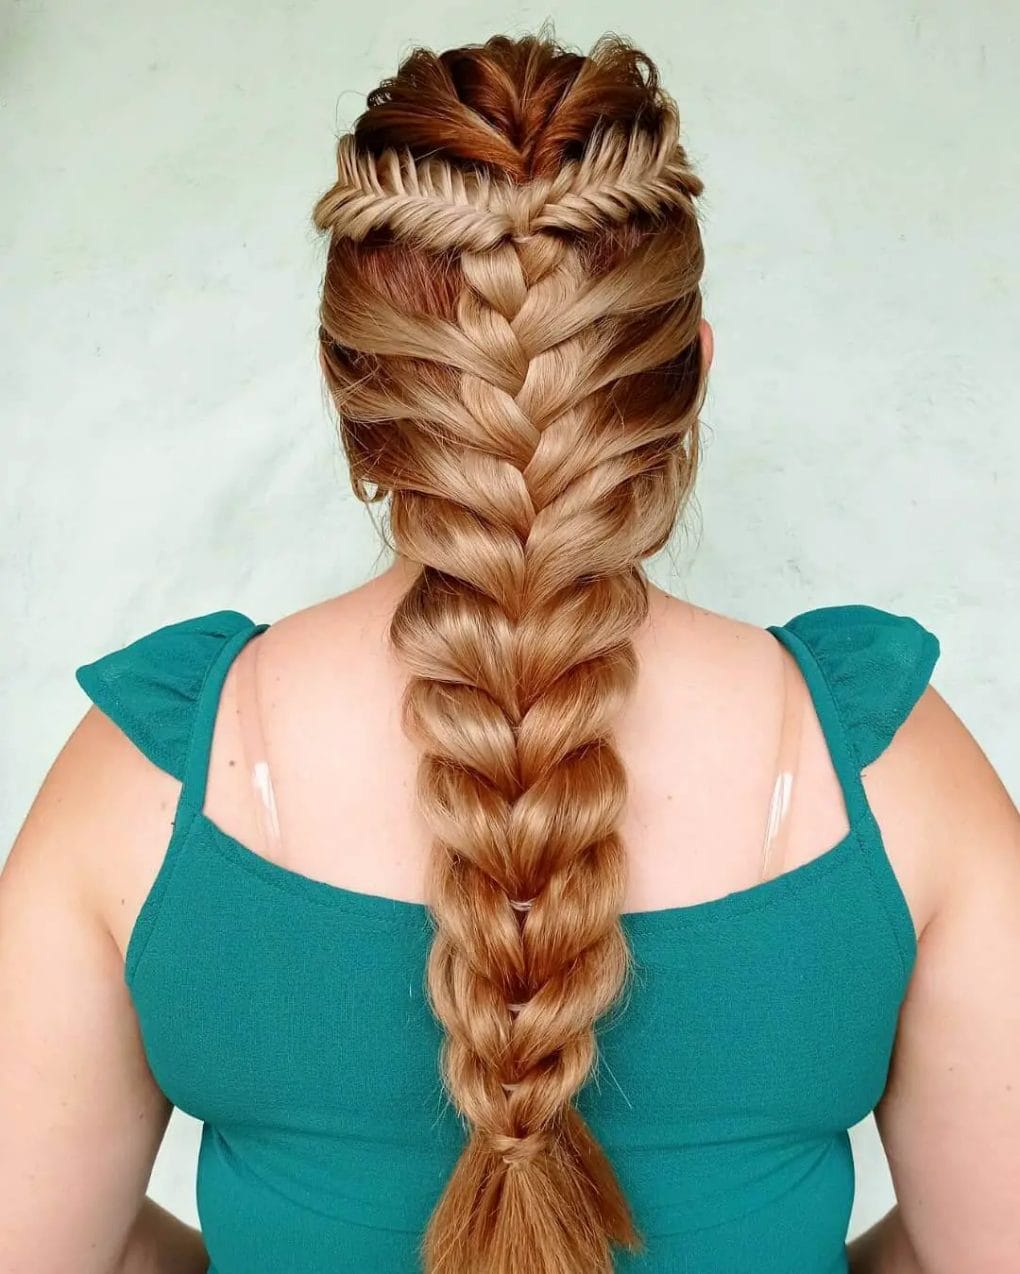 Intricate combination of fishtail, French, and pull-through braid in chestnut with golden highlights.